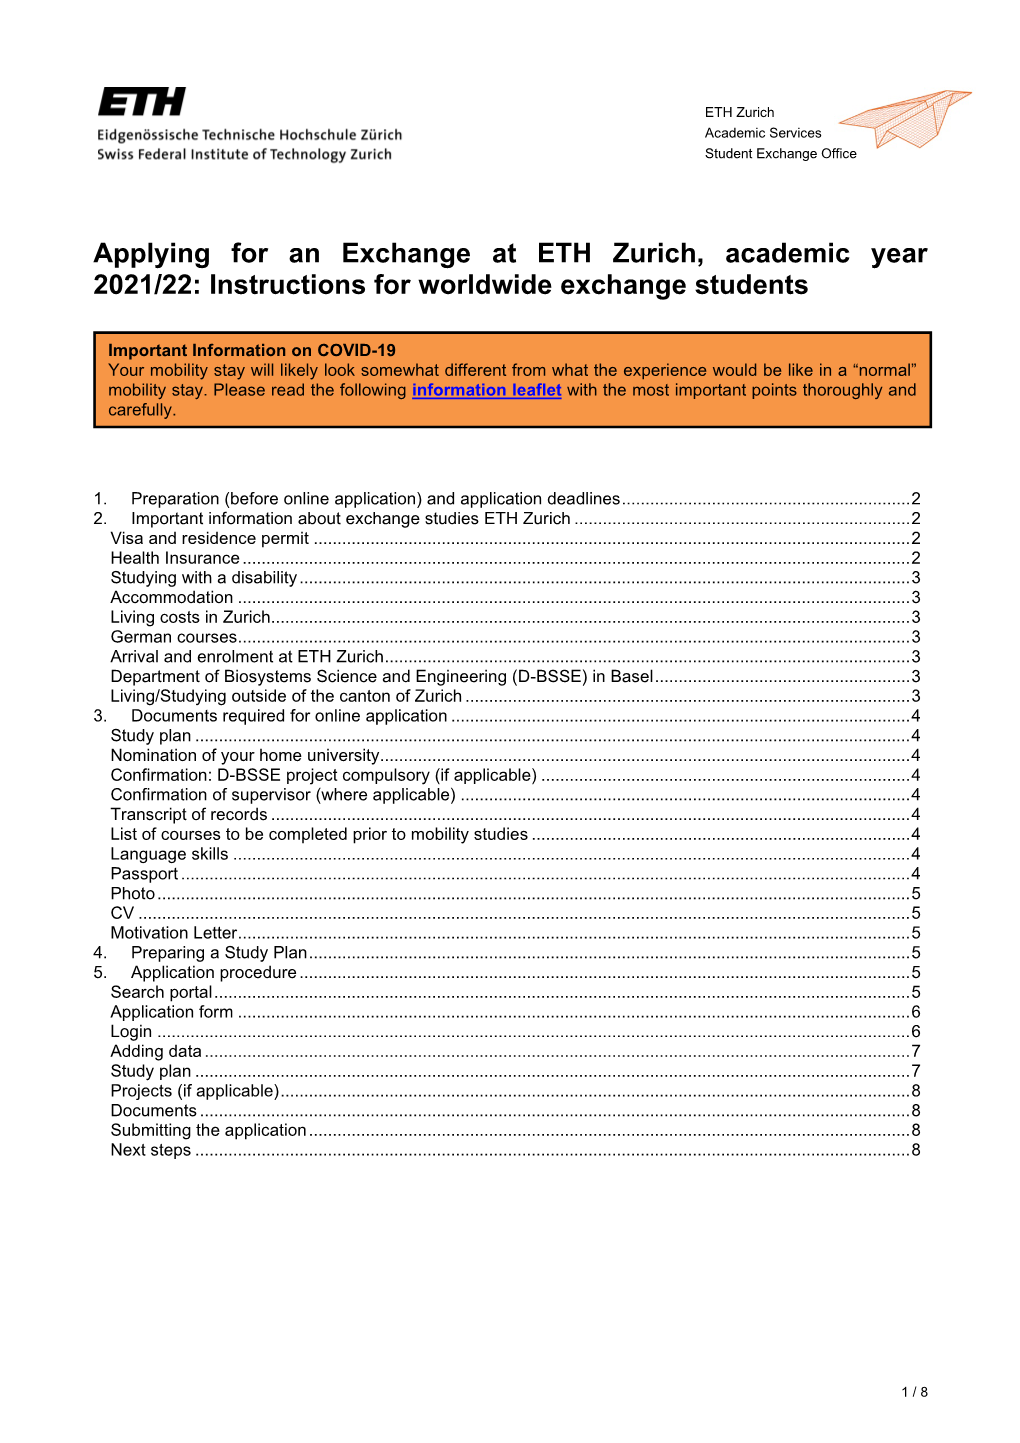 Applying for an Exchange at ETH Zurich, Academic Year 2021/22: Instructions for Worldwide Exchange Students